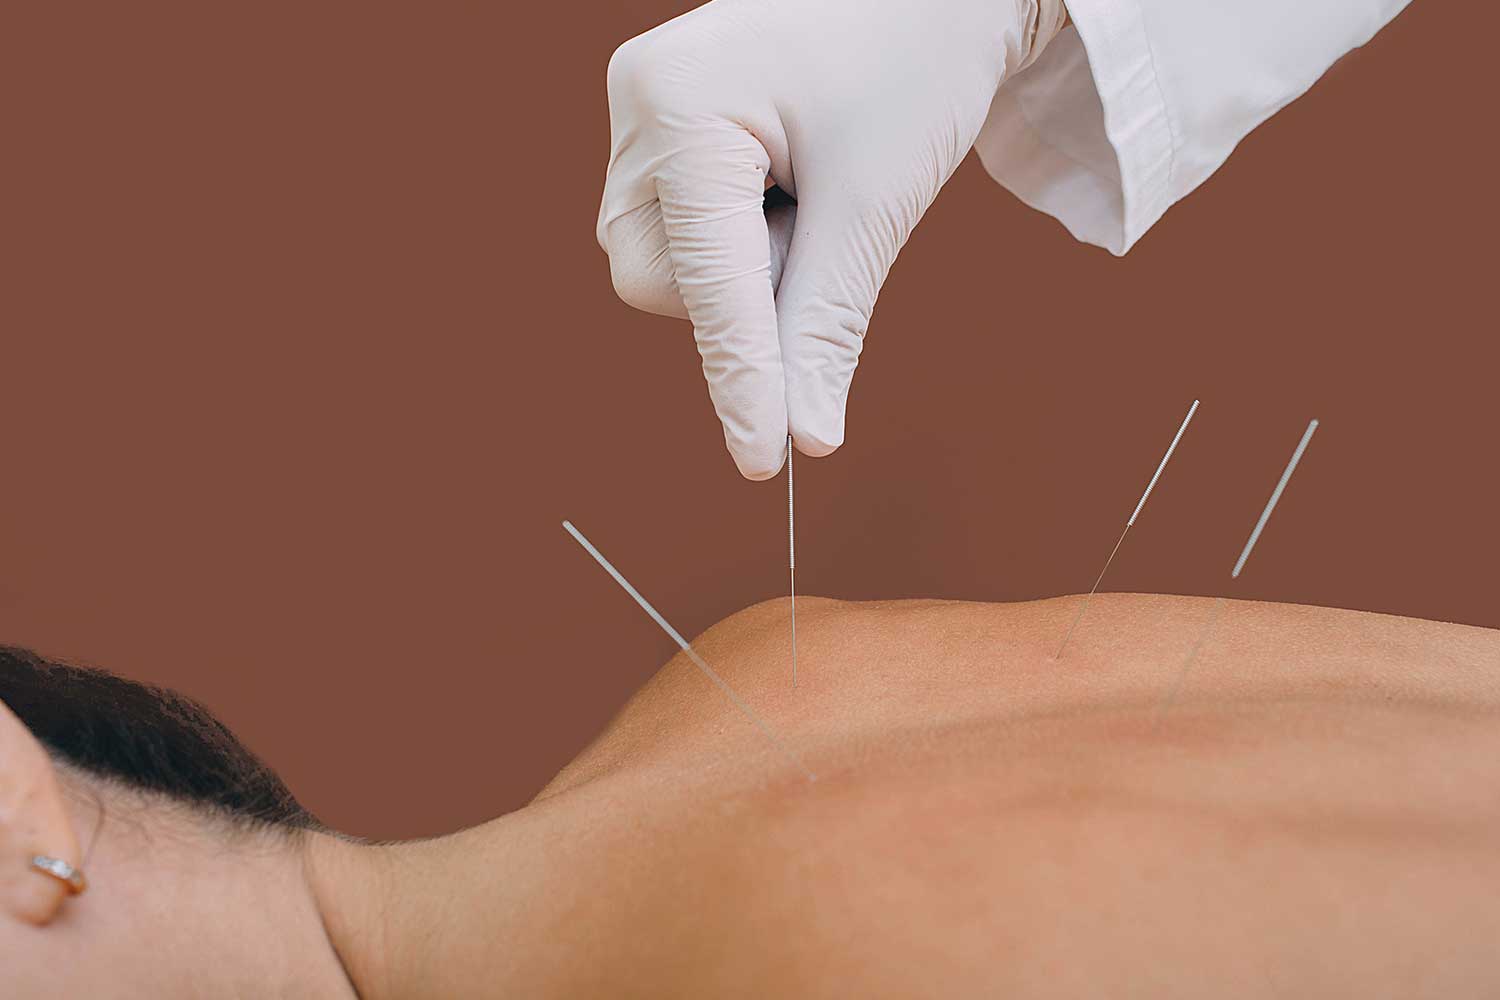 Acupuncture Pain Relief Without Painkillers